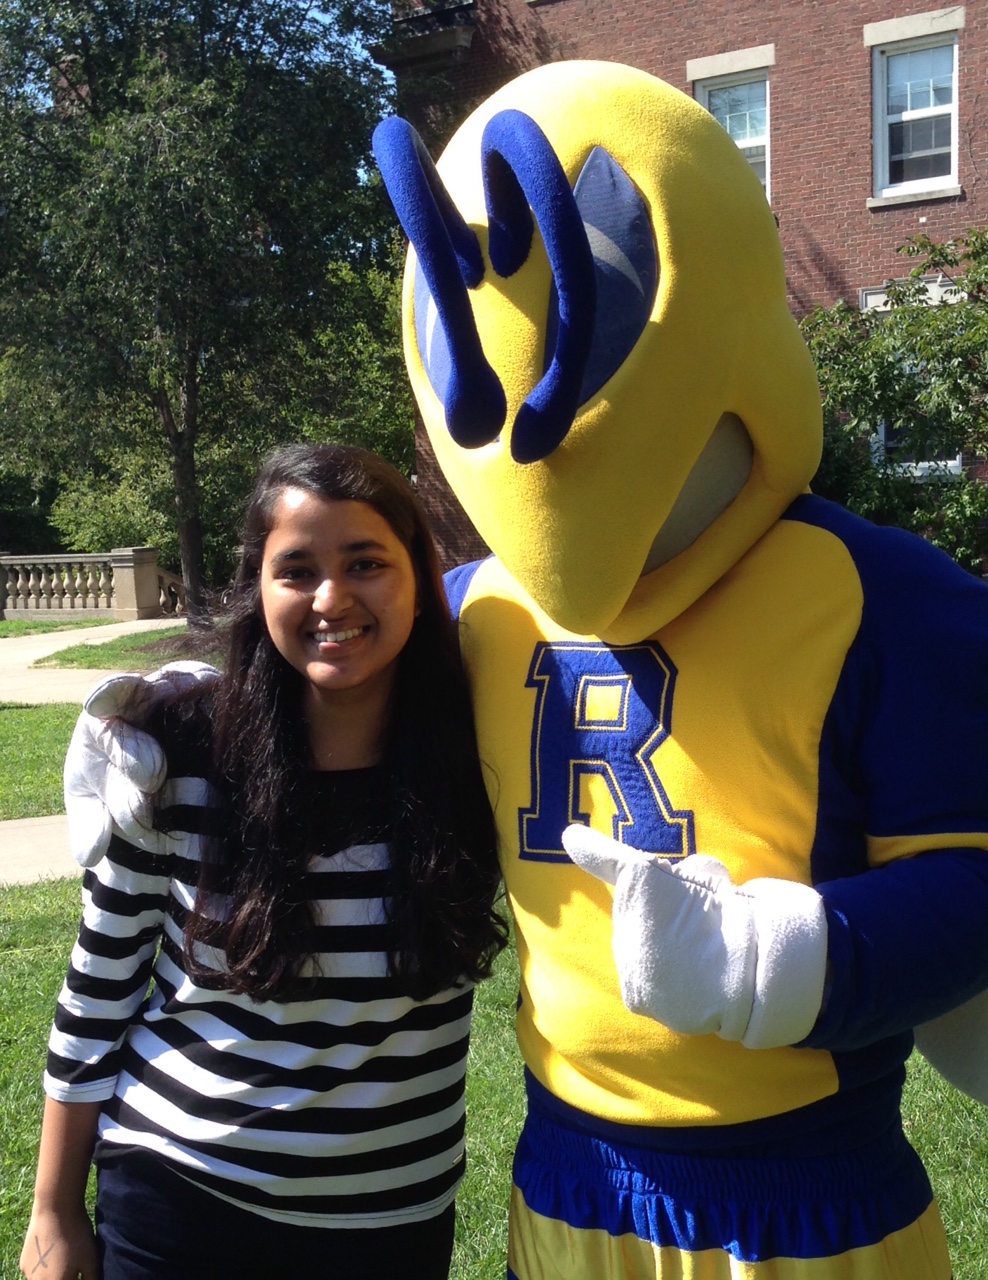 Me, posing with Rocky, the school mascot.